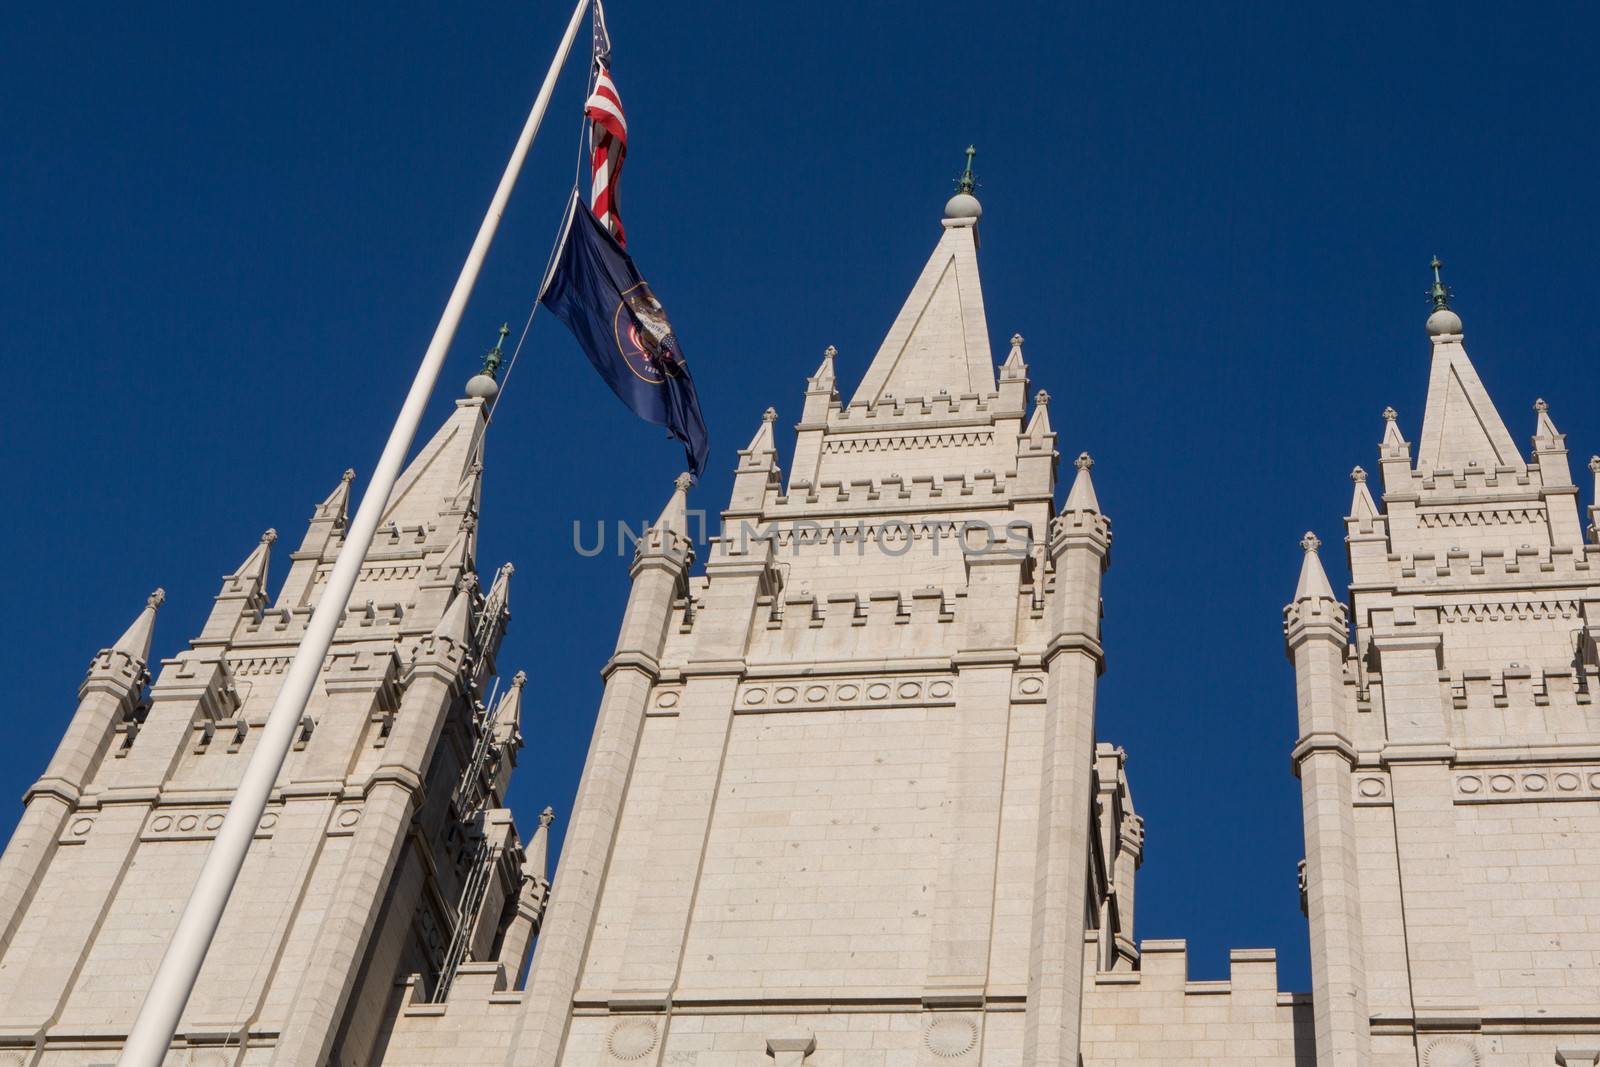 Mormon Church in Salt Lake city with a clear blue sky in the background, United States 2012.